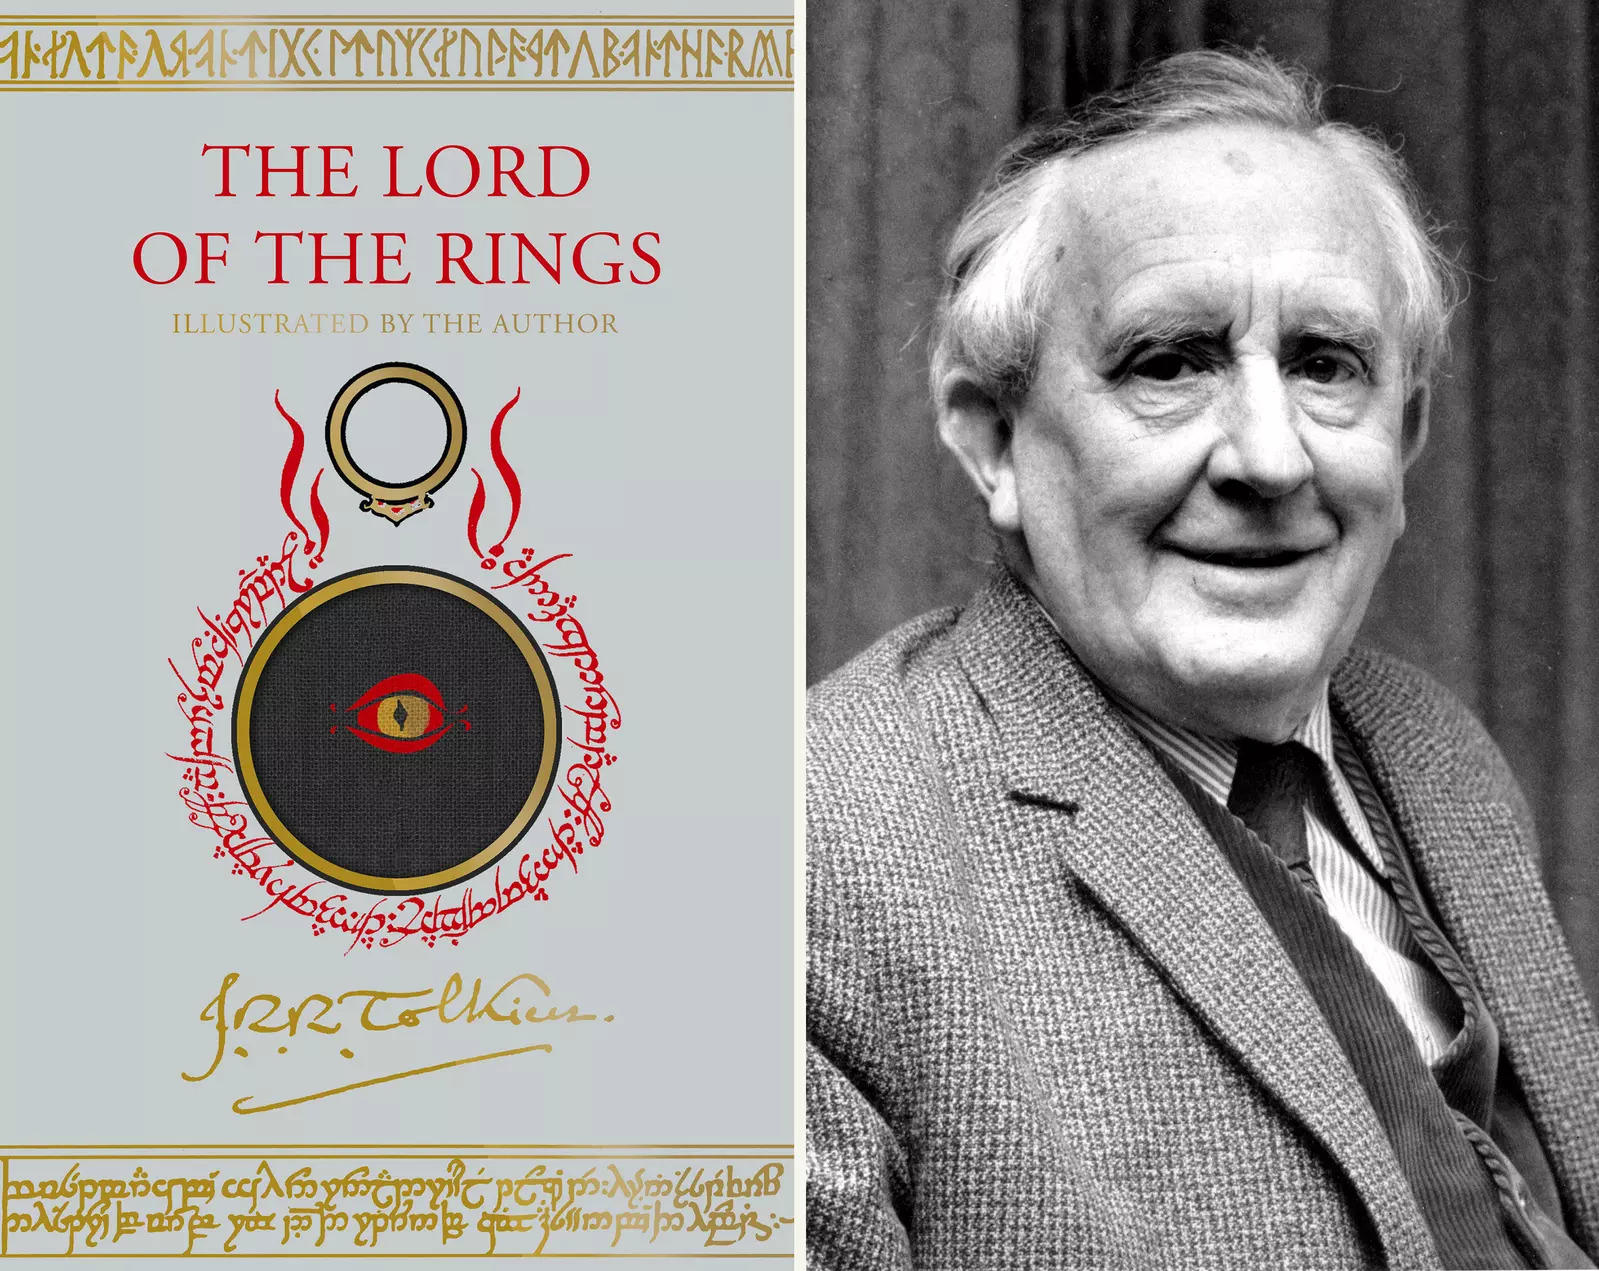 This combination photo shows an upcoming edition of J.R.R. Tolkien's "The Lord of the Rings" trilogy, left, and a 1967 photo of Tolkien. The new edition will include paintings, drawings and other illustrations by the British author for the first time since it was published in the mid-1950s. Houghton Mifflin Harcourt Books & Media announced Thursday, March 25, 2021, that the new version will come out Oct. 19. (Photo)